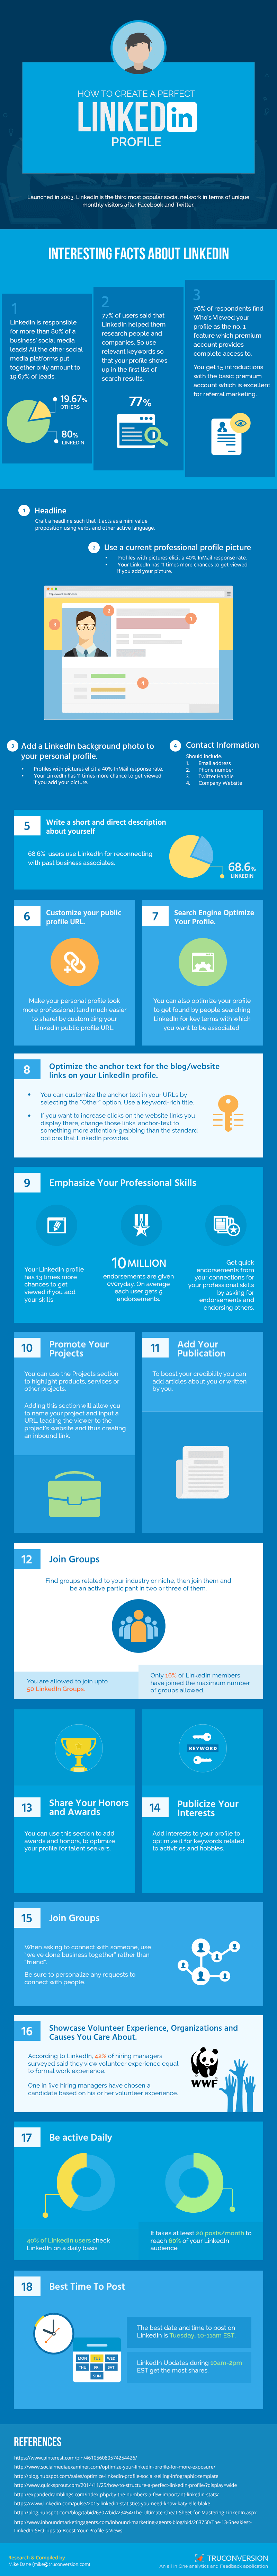 How to Create a Perfect LinkedIn Profile Infographic